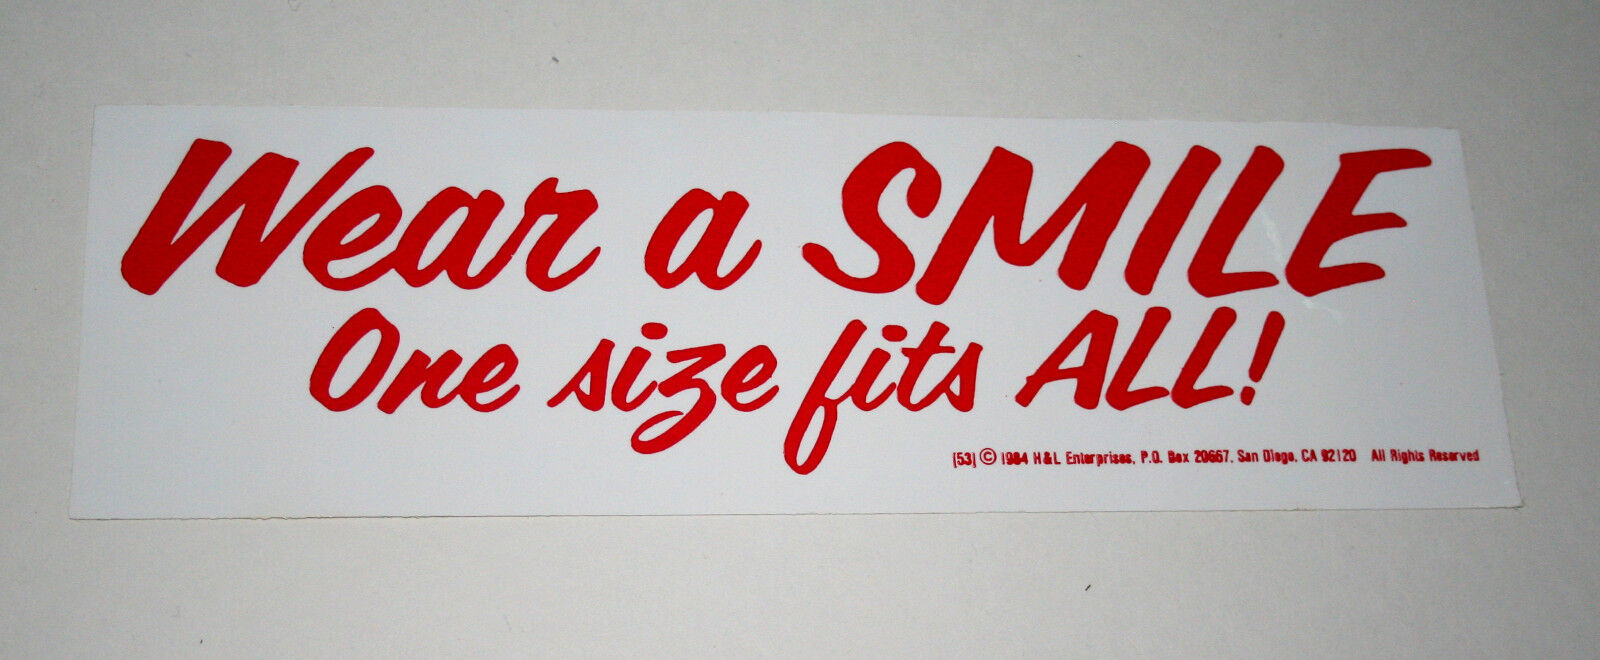 Vtg Campy Slogan Wear A Smile 1 Size Fits All Funny Bumper Sticker New NOS 1984